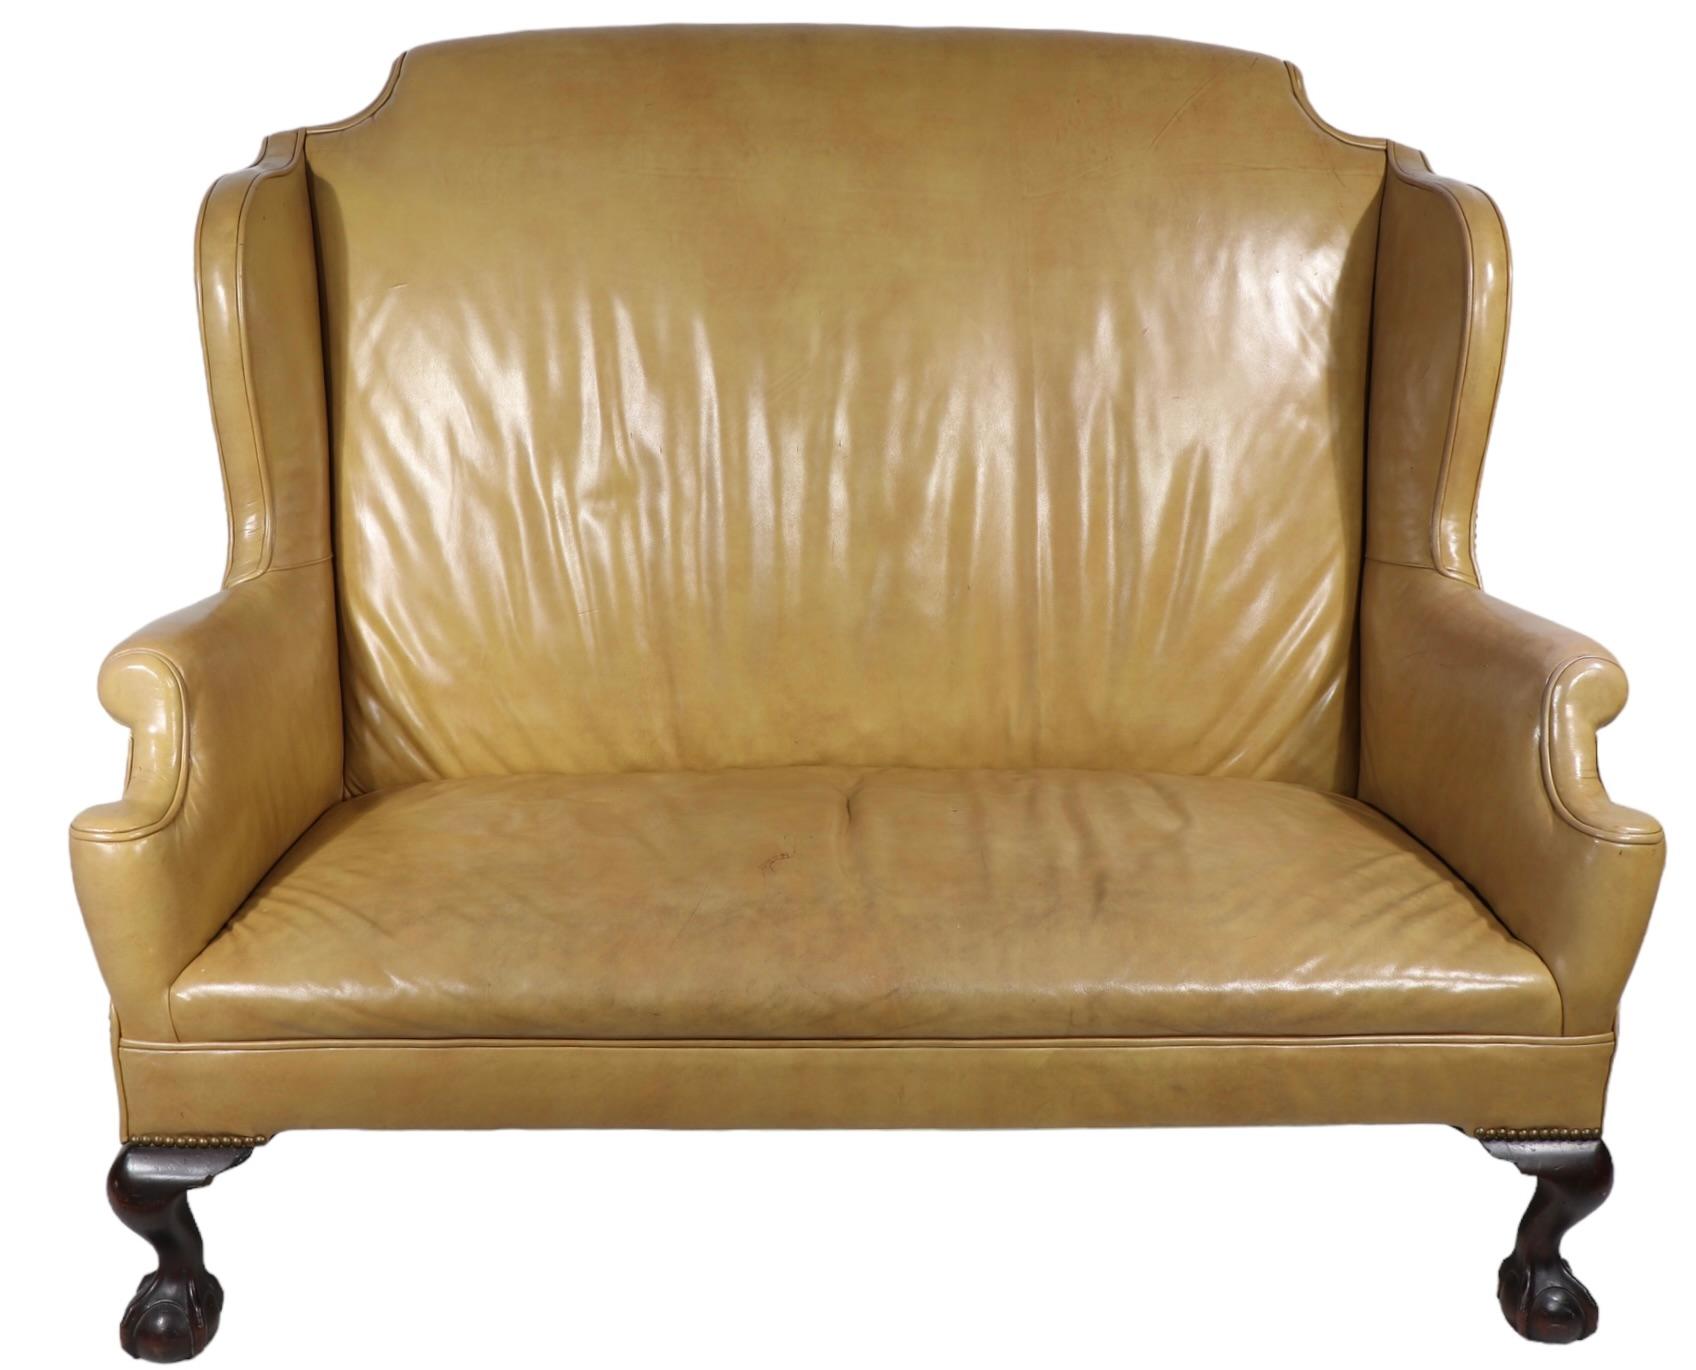 Chippendale Style Leather Loveseat from Ft. William Henry Hotel Lake George N.Y. For Sale 10